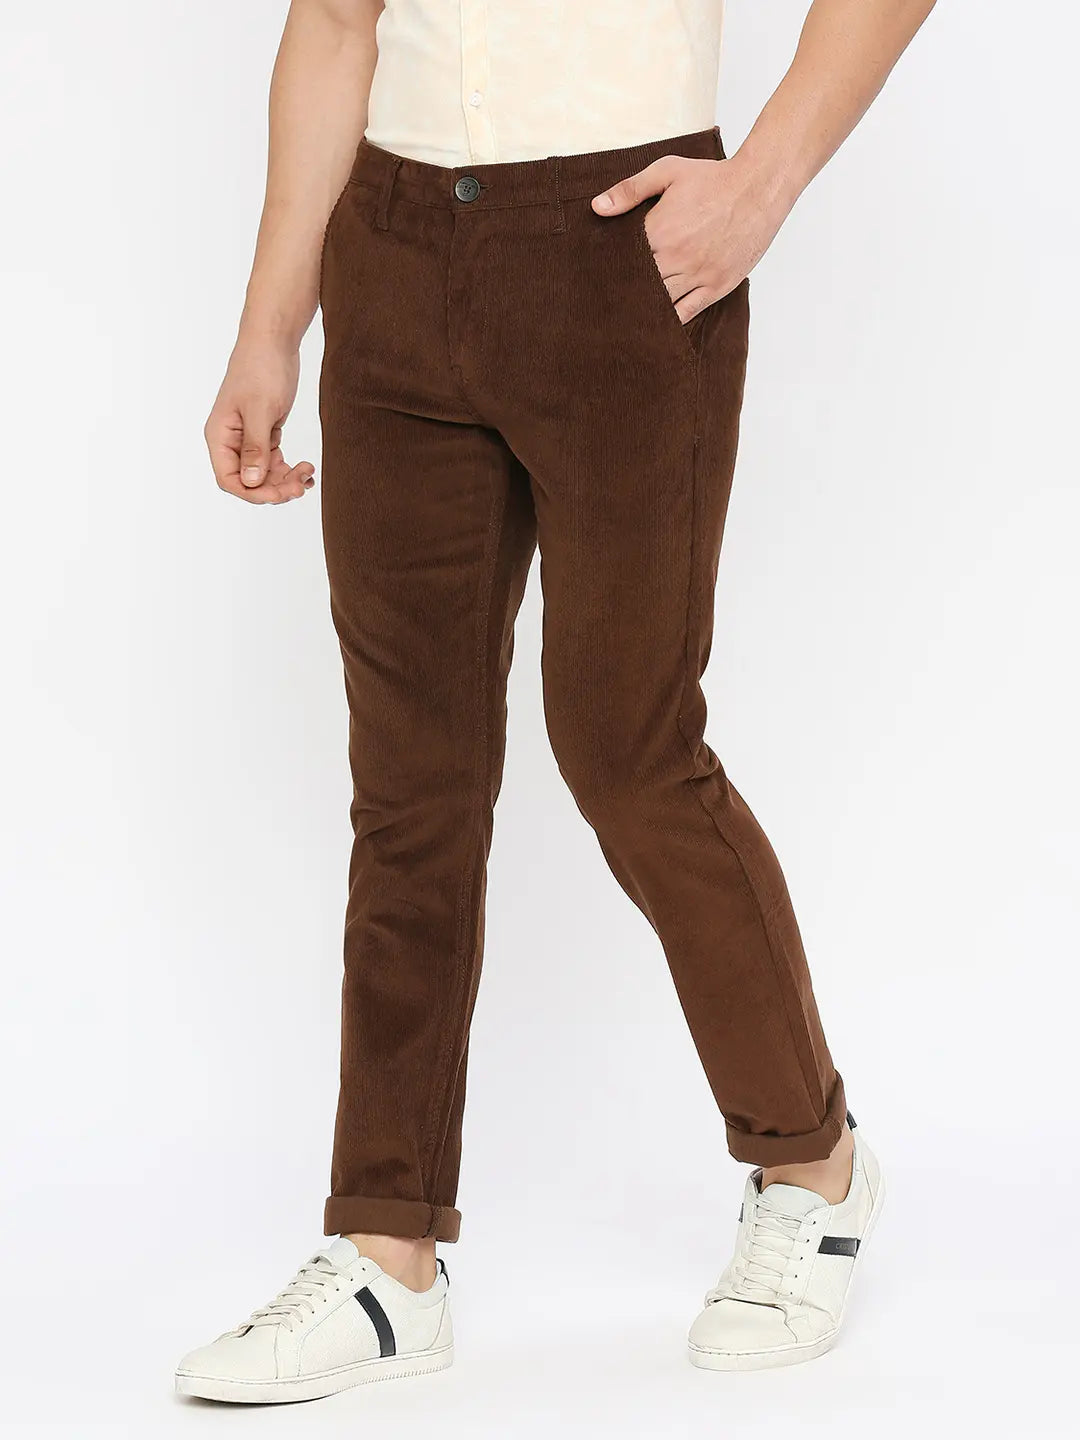 Buy Spykar Olive Green Cotton Slim Fit Tapered Length Trousers for Men  online